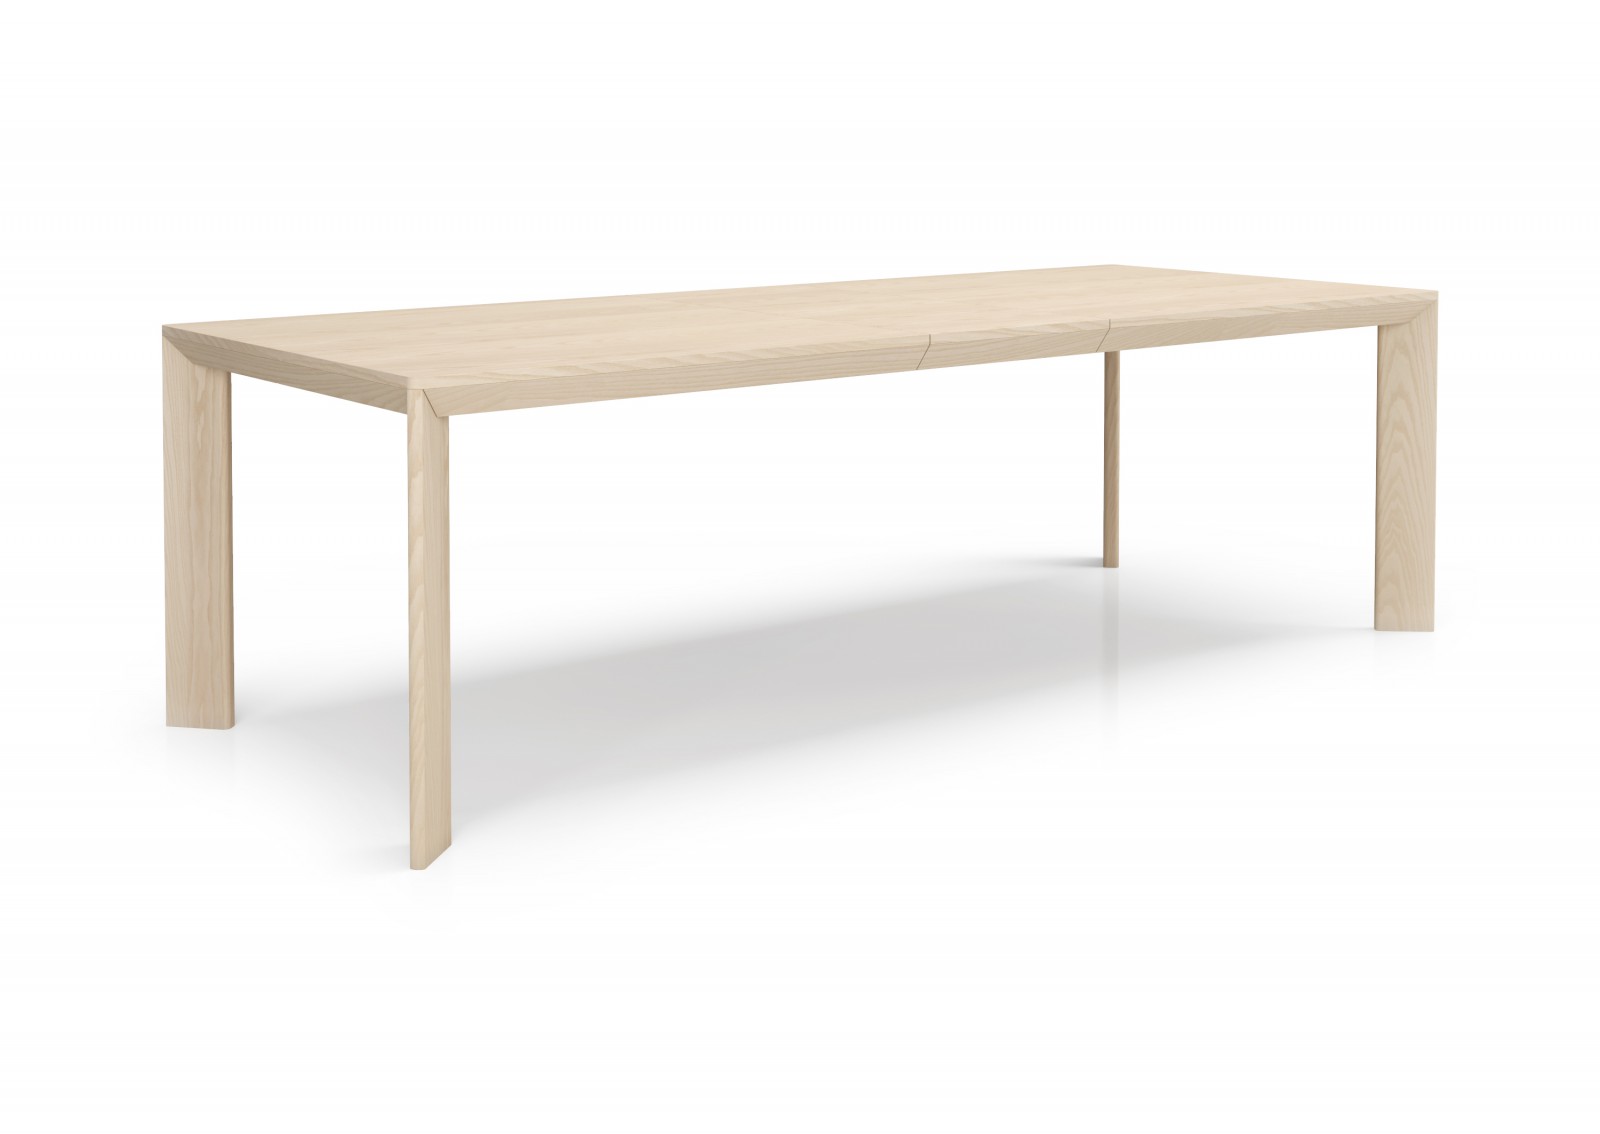 82'' Single extension table